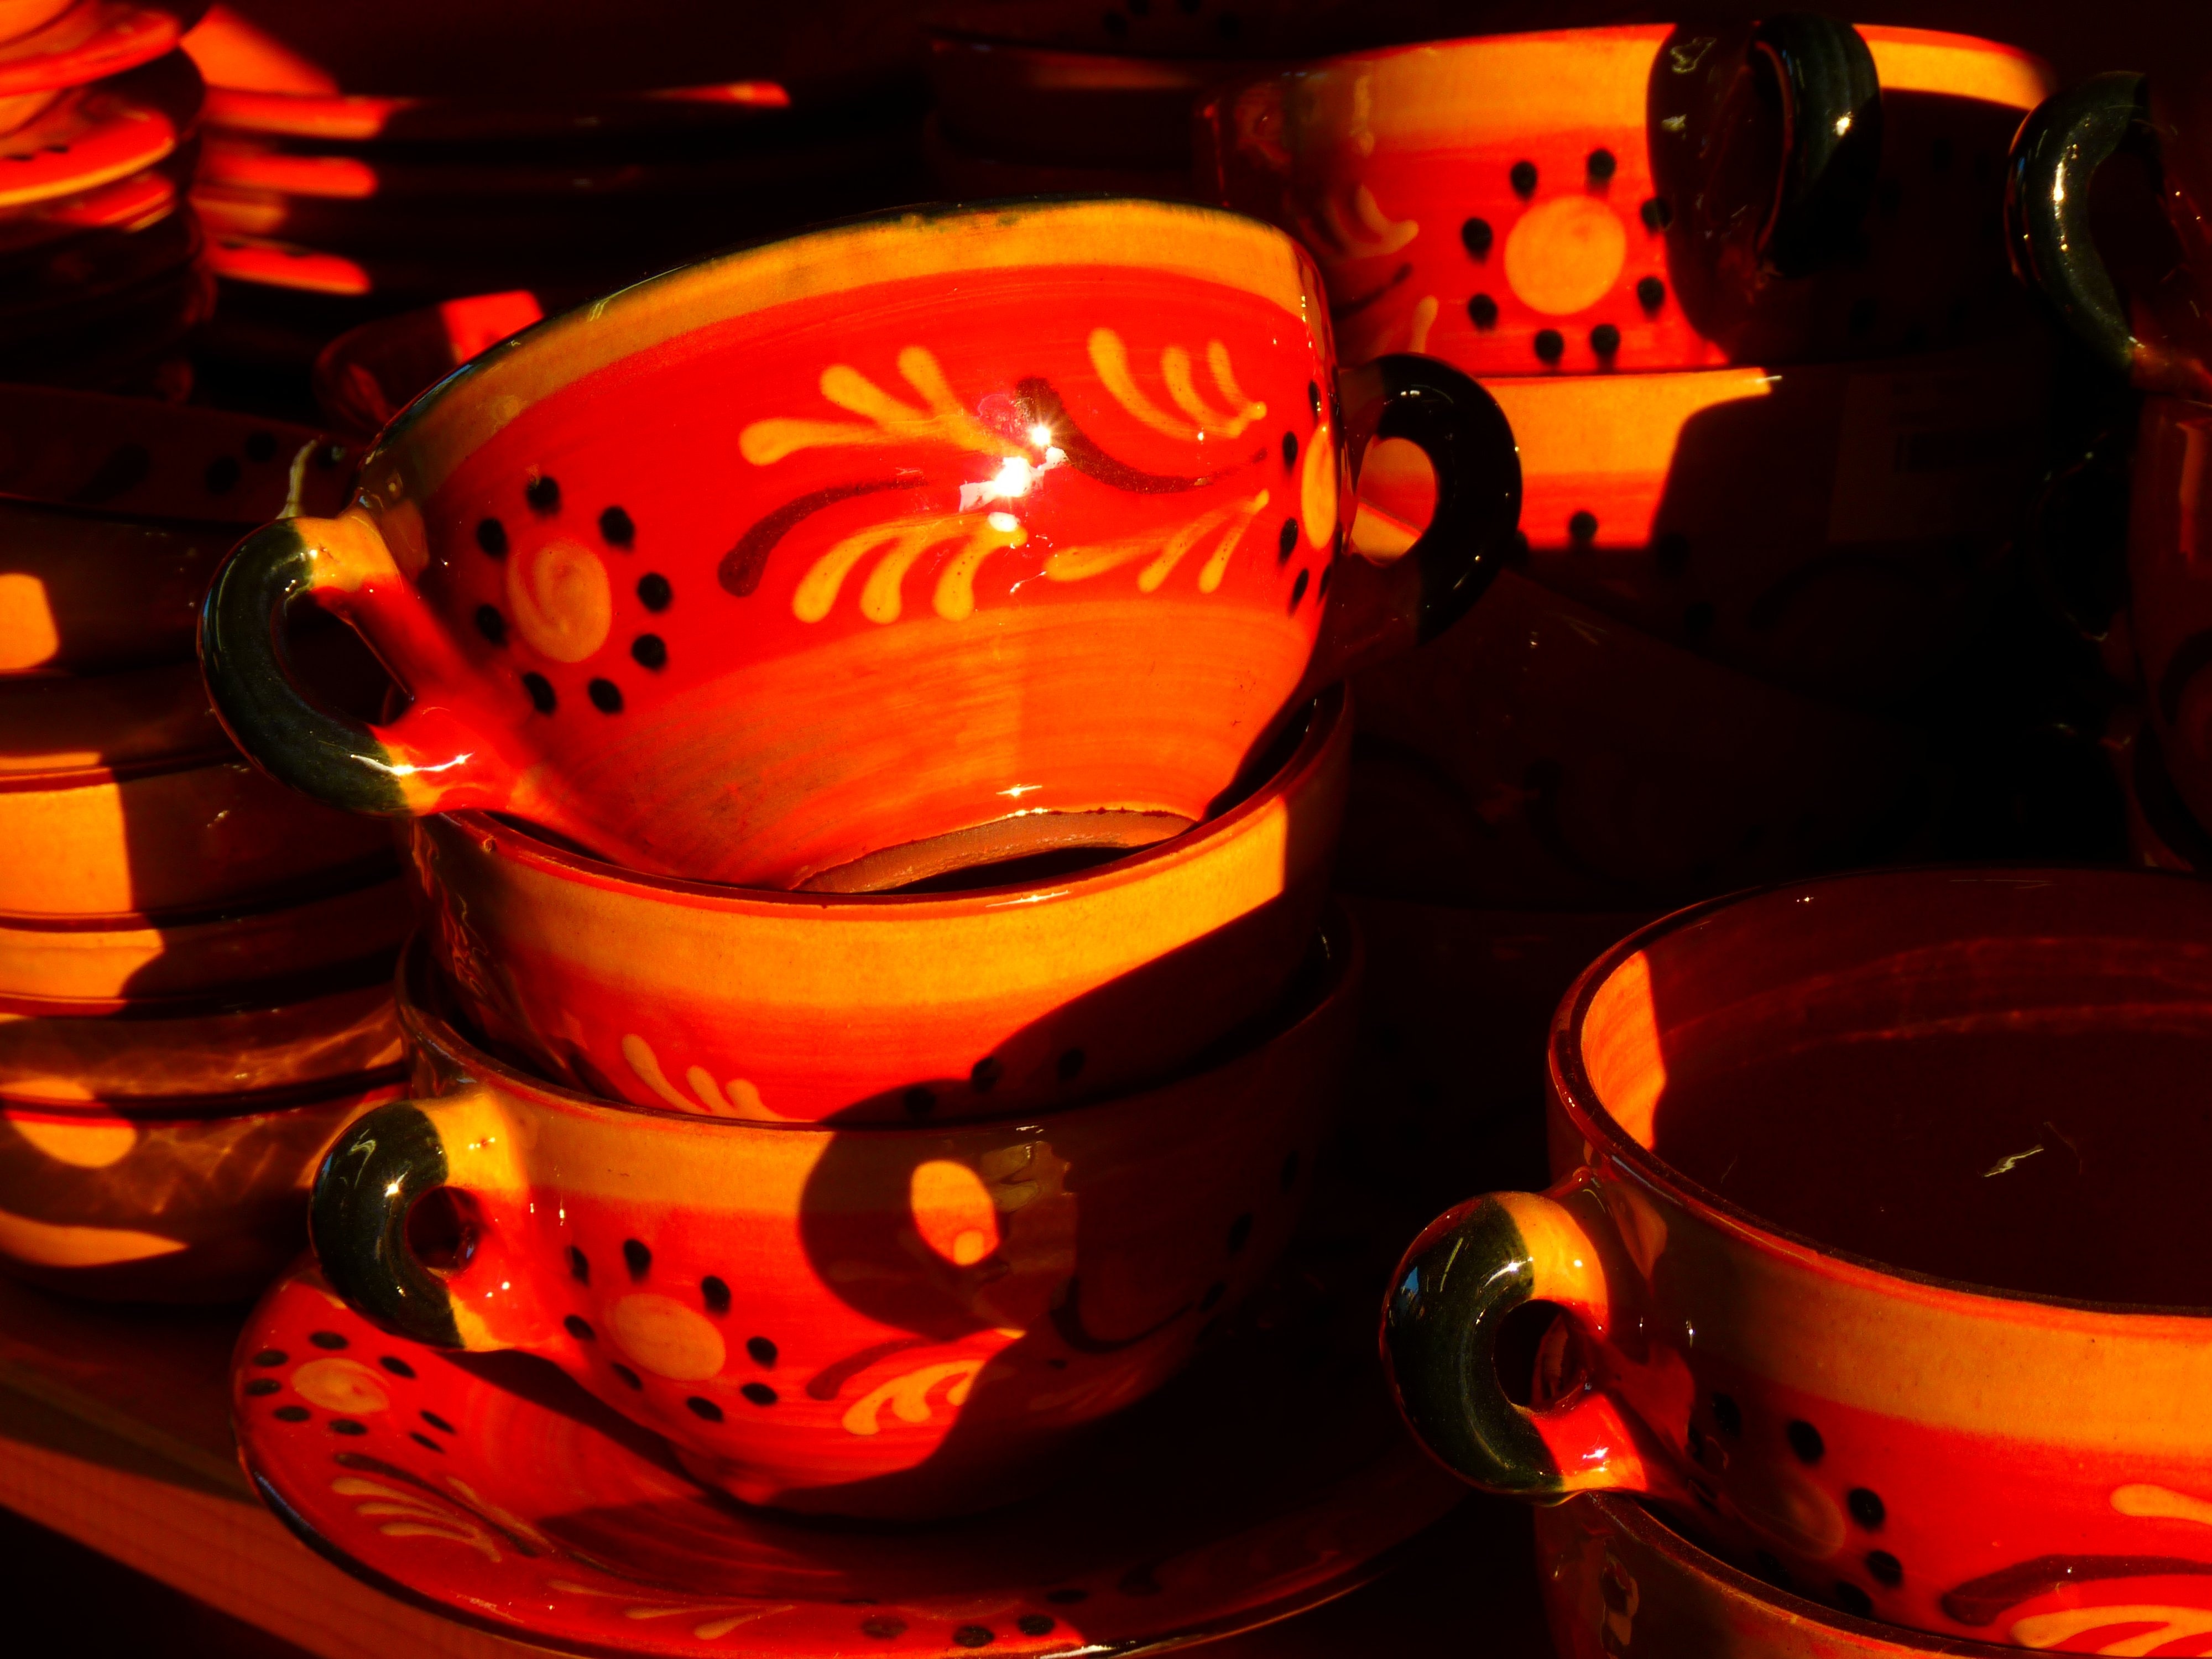 red white and black ceramic floral teacups lot